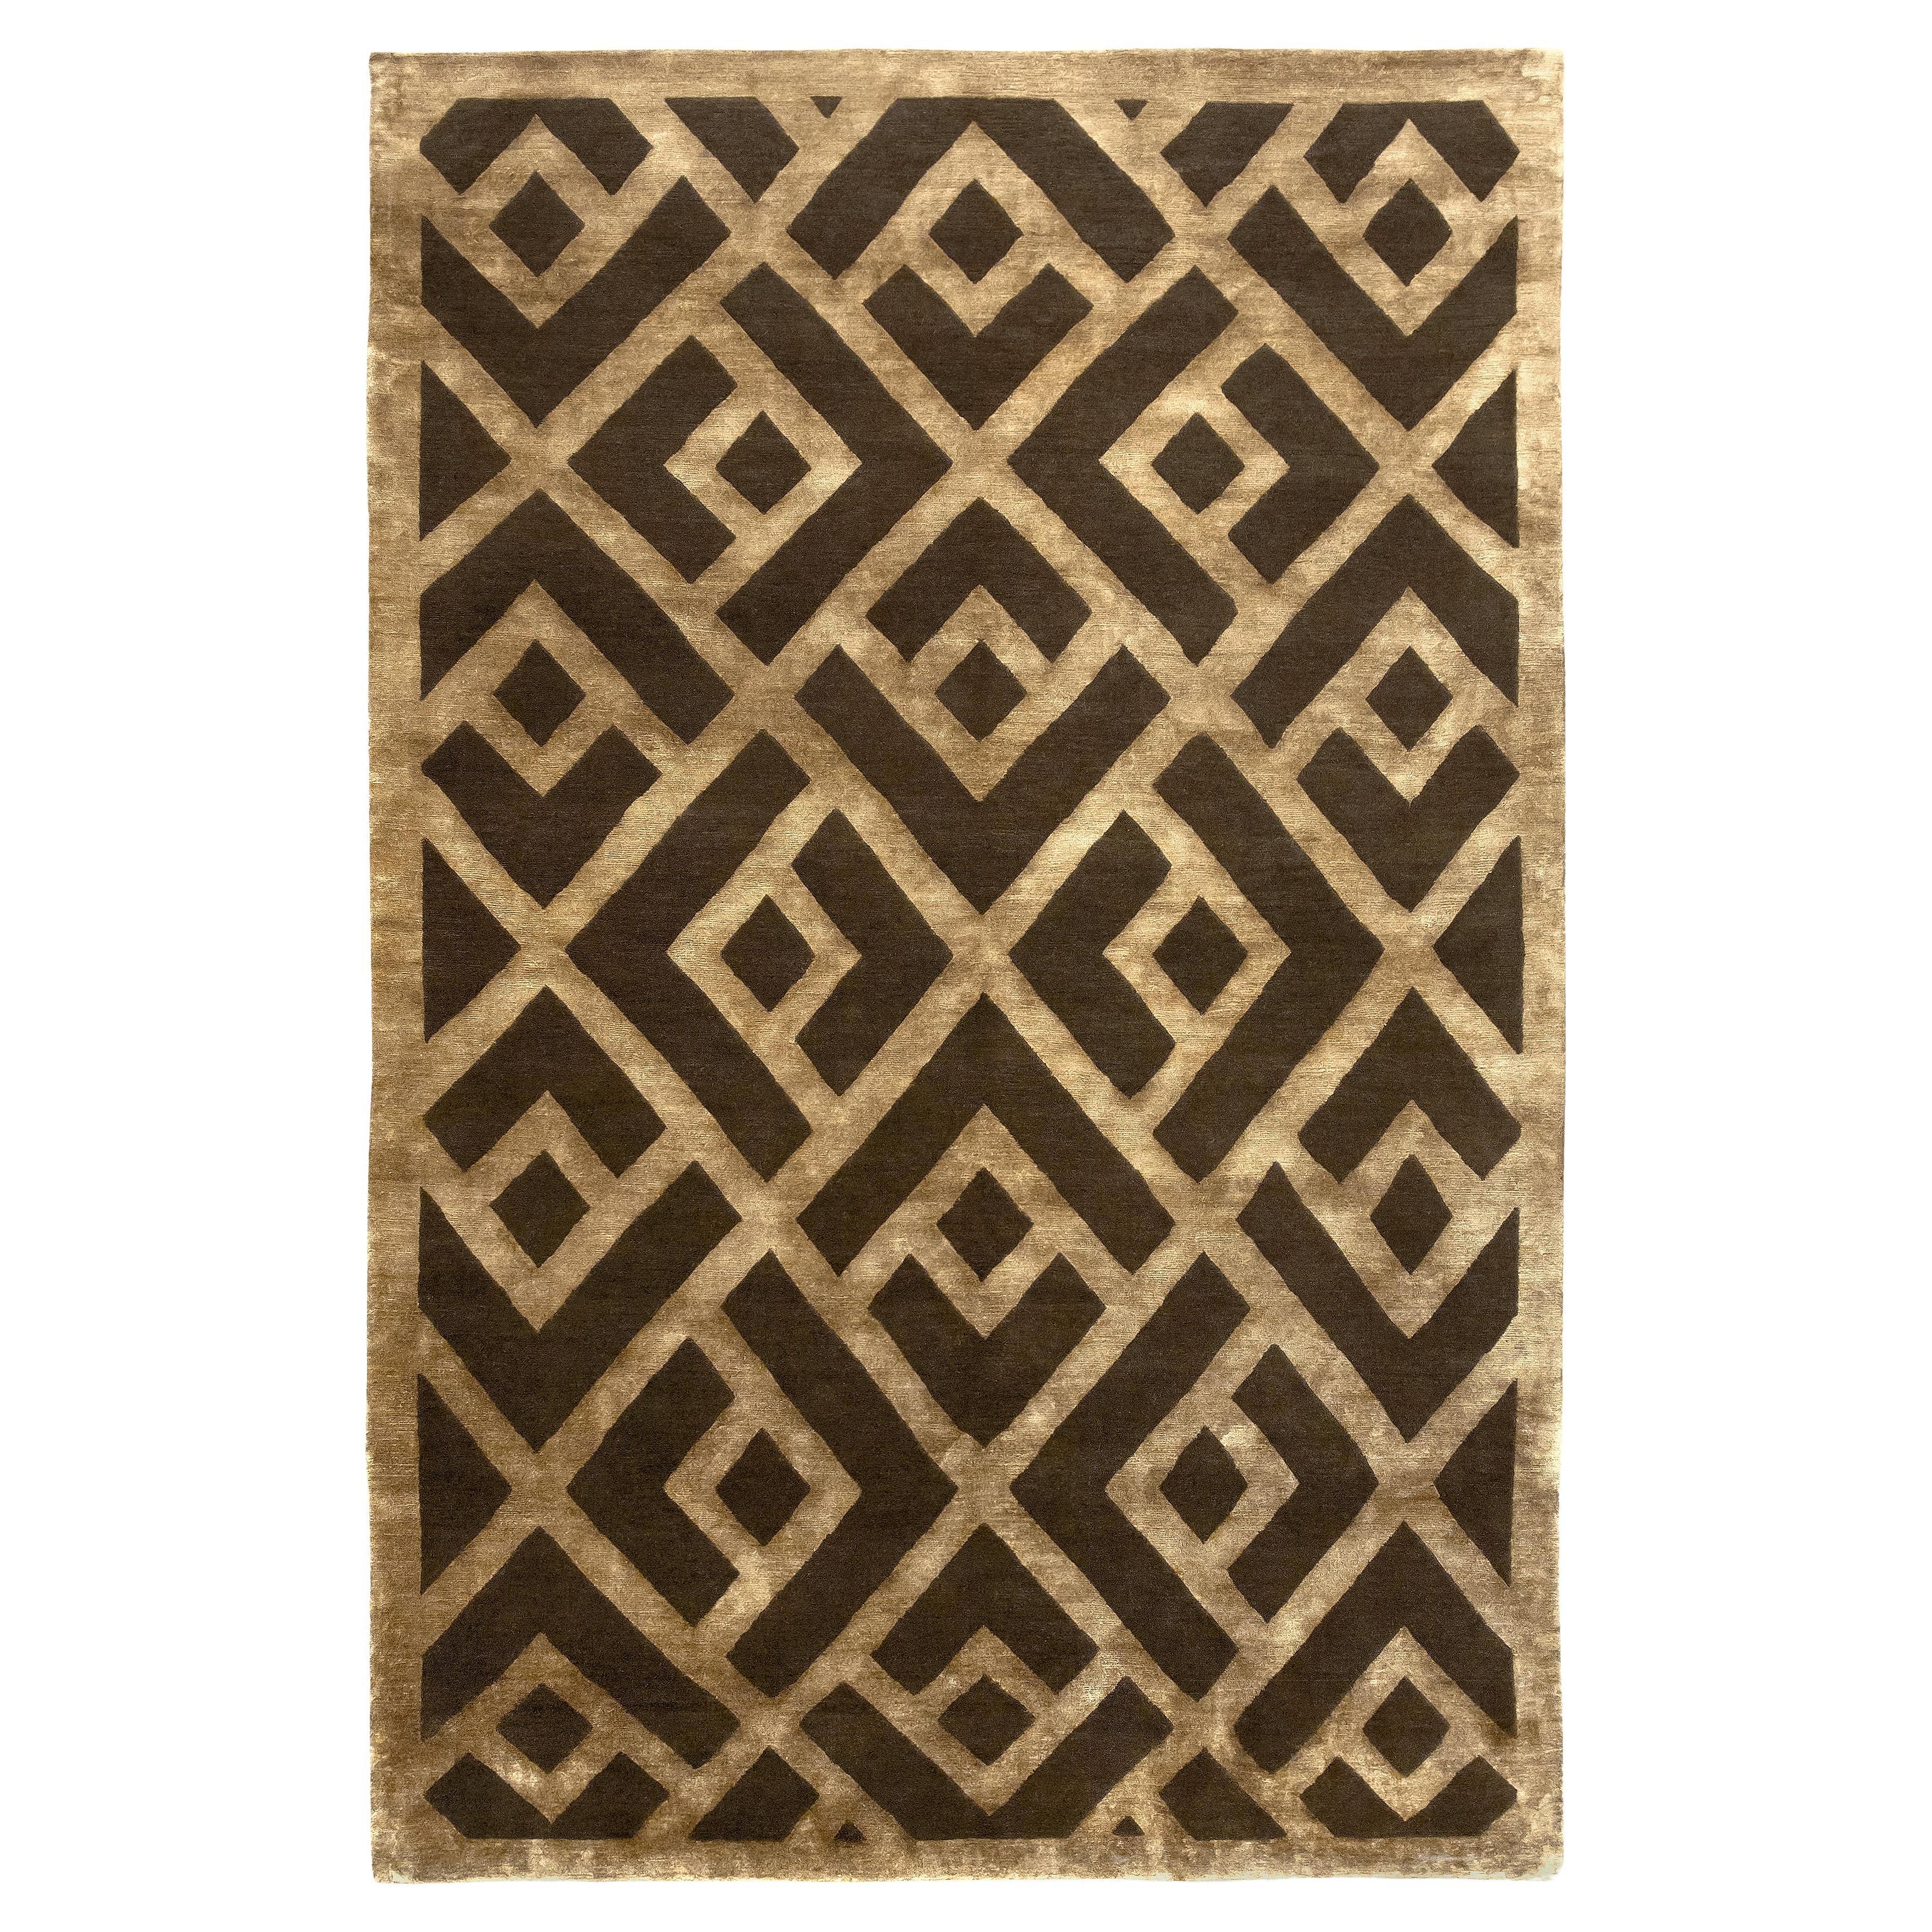 Luxury Modern Hand-Knotted Adaptations Laced Diamond Brown/Gold 12x16 Rug